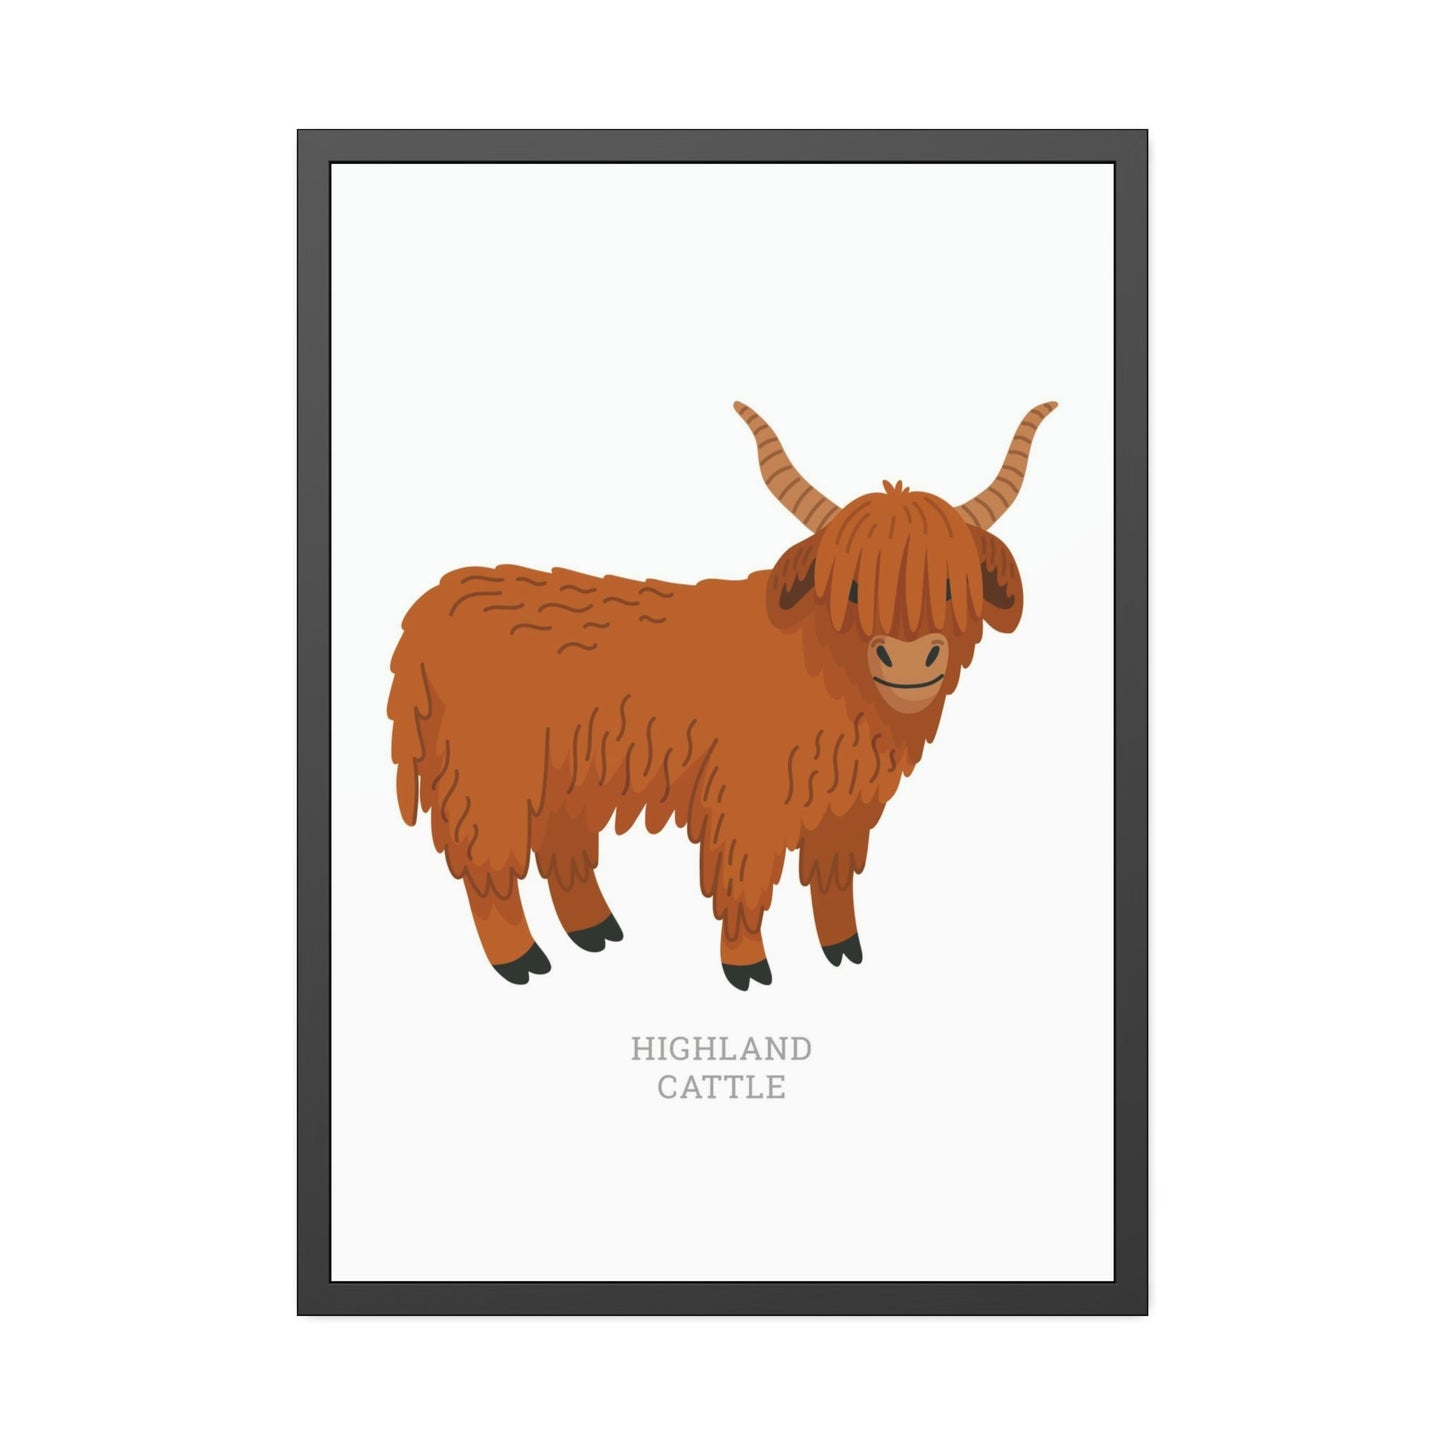 Tranquil Grazing: Cow Art a Calming Wall Art Addition to Any Space